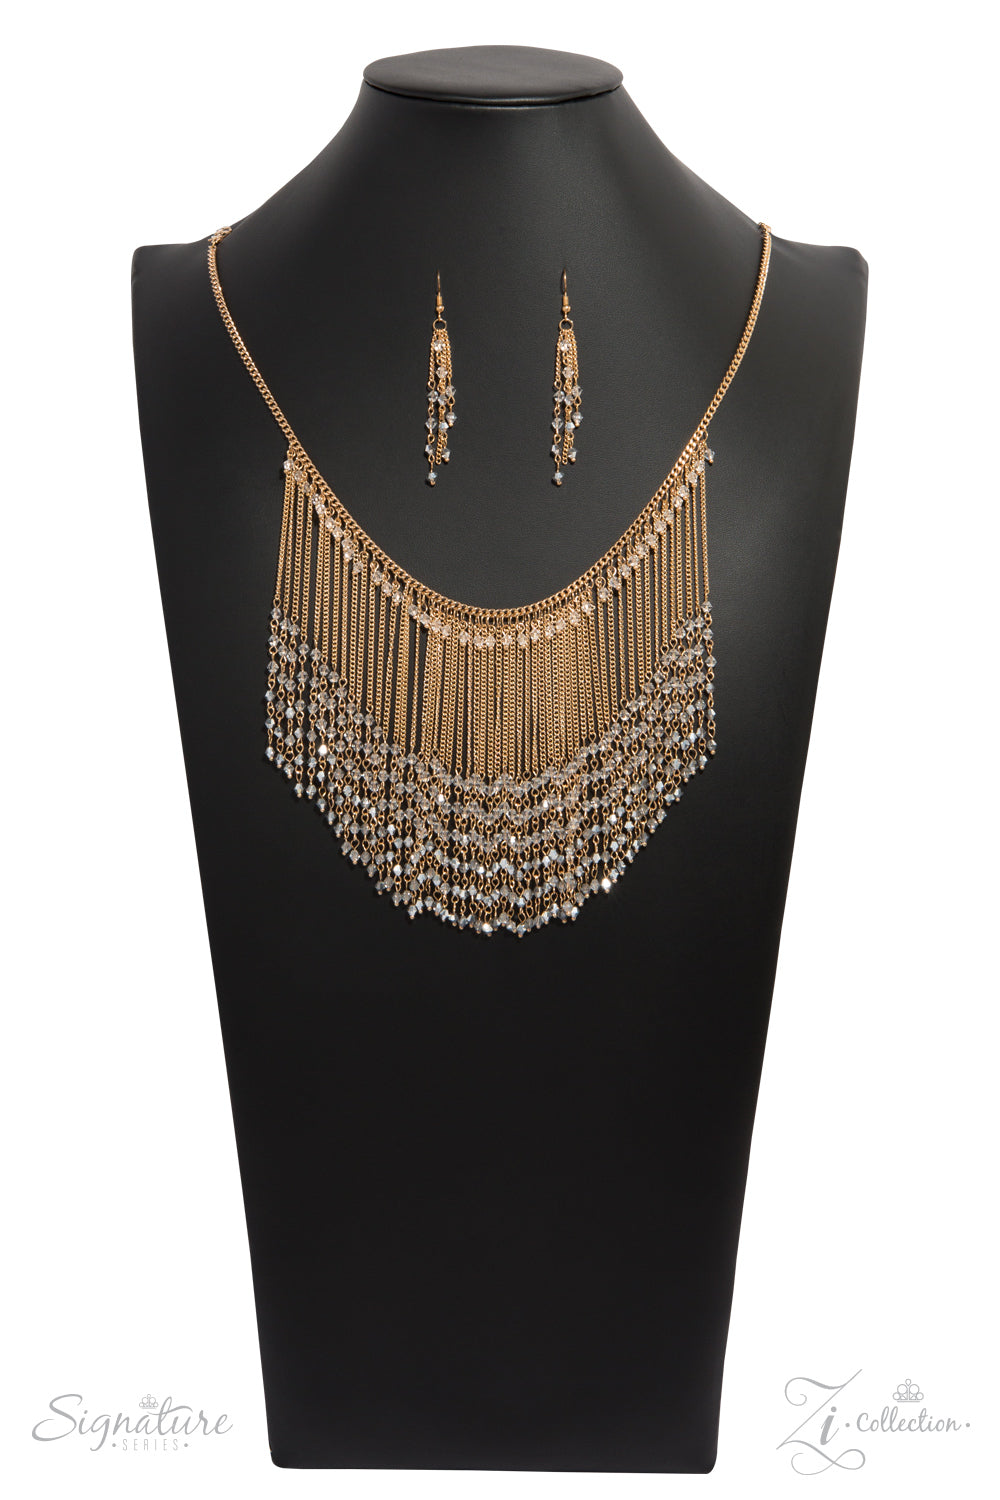 The Donnalee Zi Collection Gold Paparazzi Necklace Cashmere Pink Jewels - Cashmere Pink Jewels & Accessories, Cashmere Pink Jewels & Accessories - Paparazzi